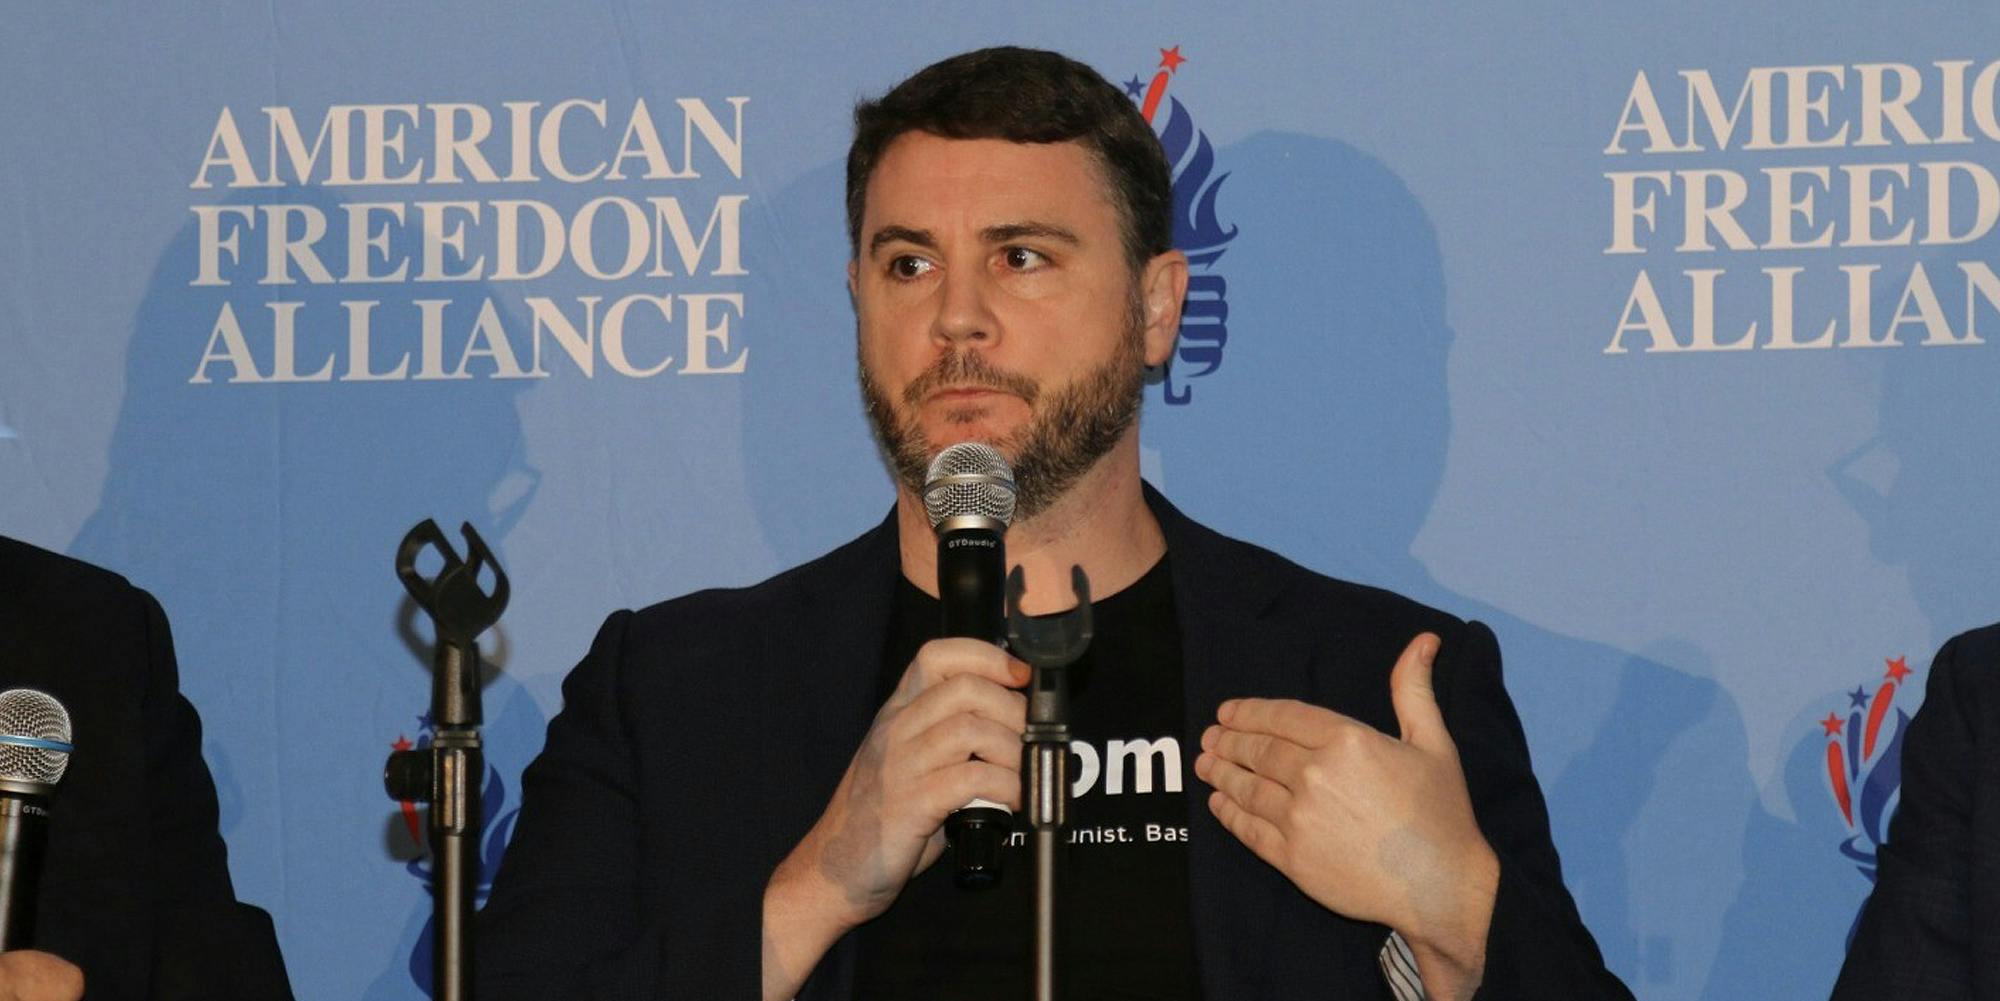 James Lindsay speaking in microphone in front of blue "AMERICAN FREEDOM ALLIANCE" background